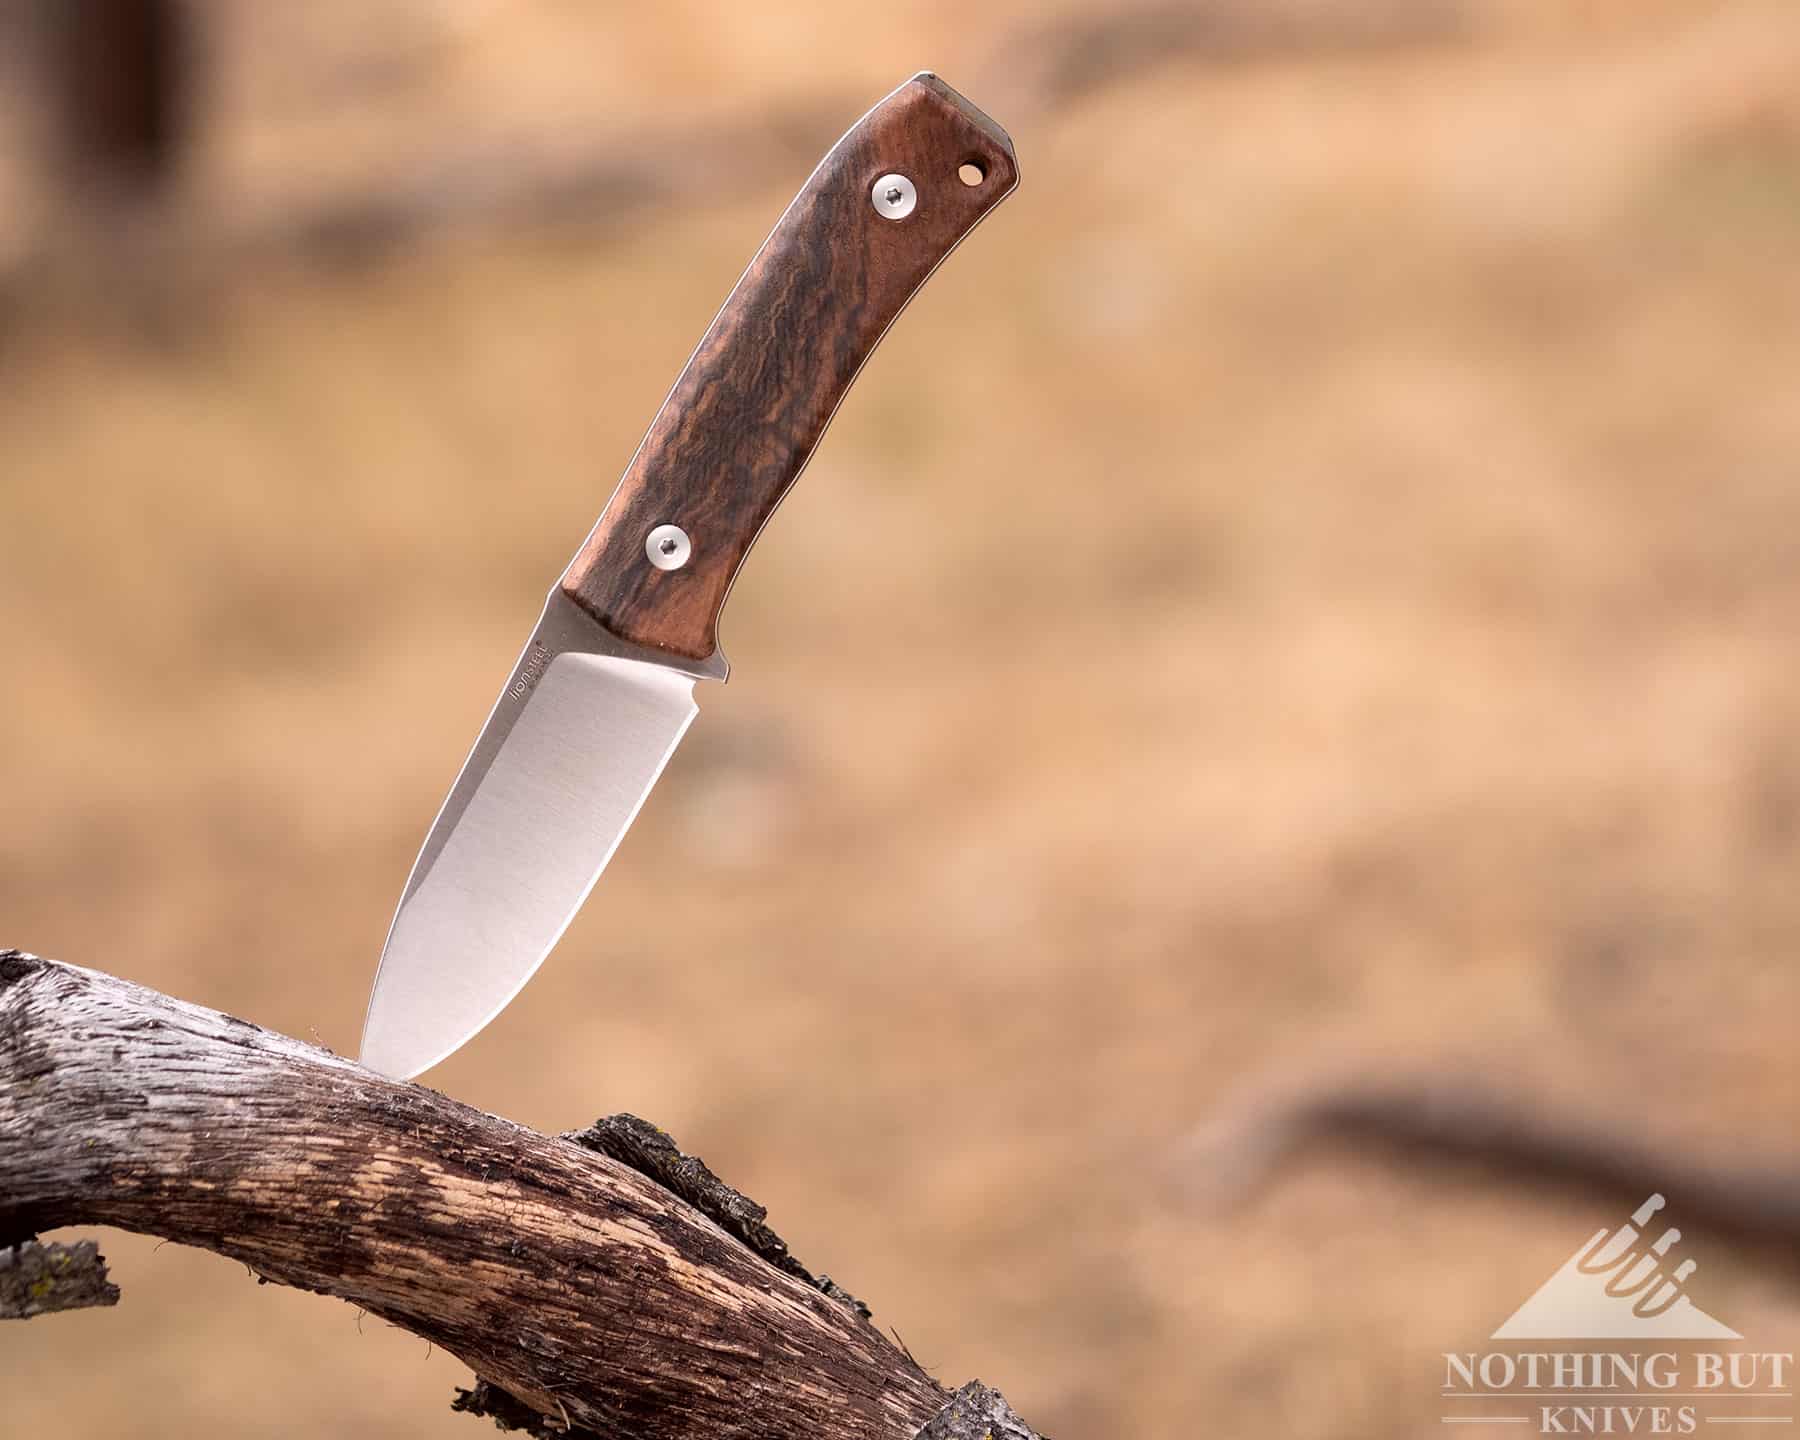 The LionSteel M4 is a superbly usable knife, which (to me) falls into that small category of knives which are both designed and executed just so.